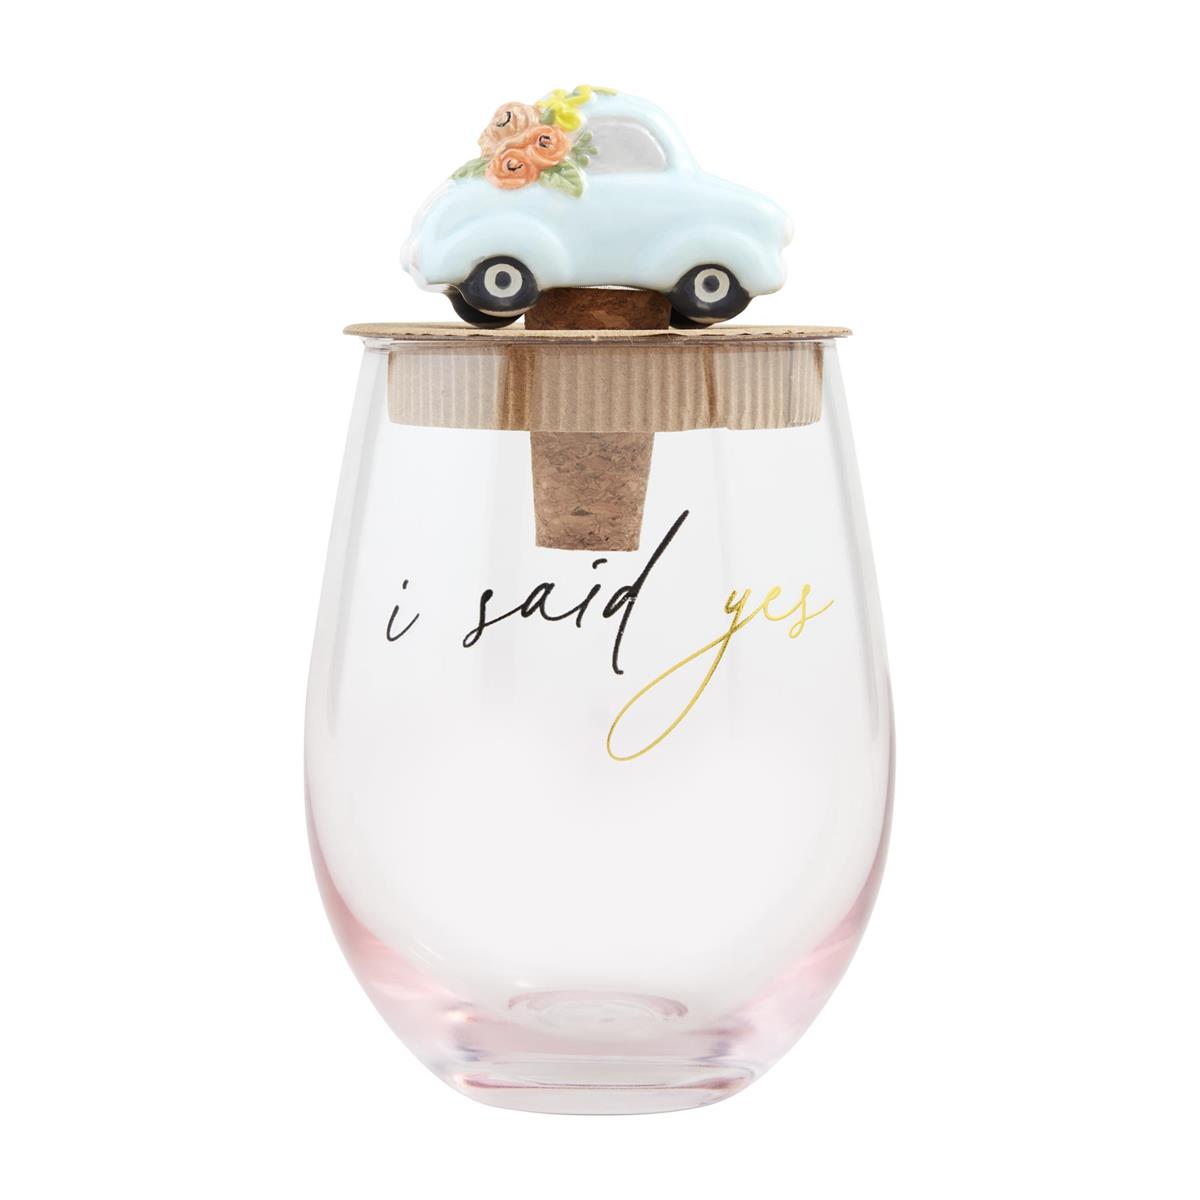 MUD PIE ENGAGED WINE GLASS & STOPPER SETS